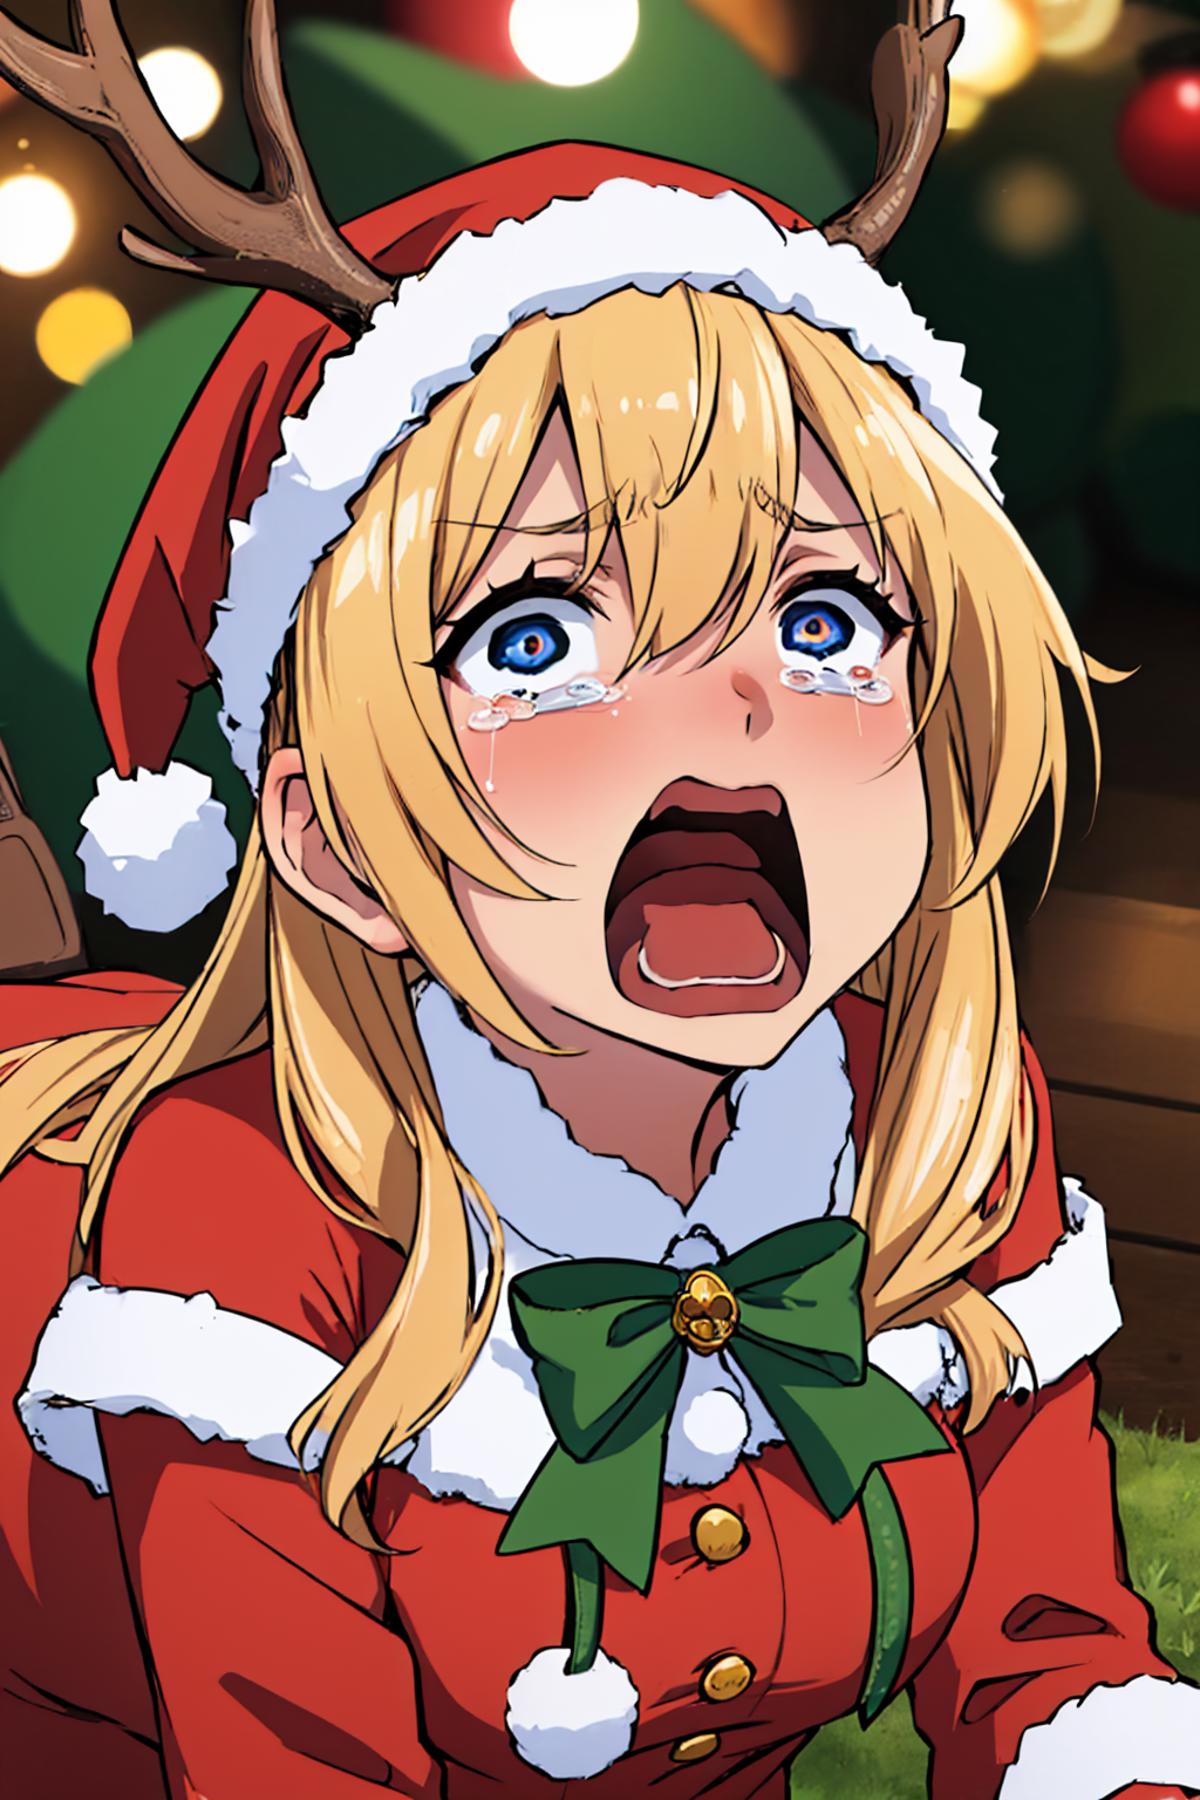 A cartoon character wearing a Santa hat and a green bow is crying.